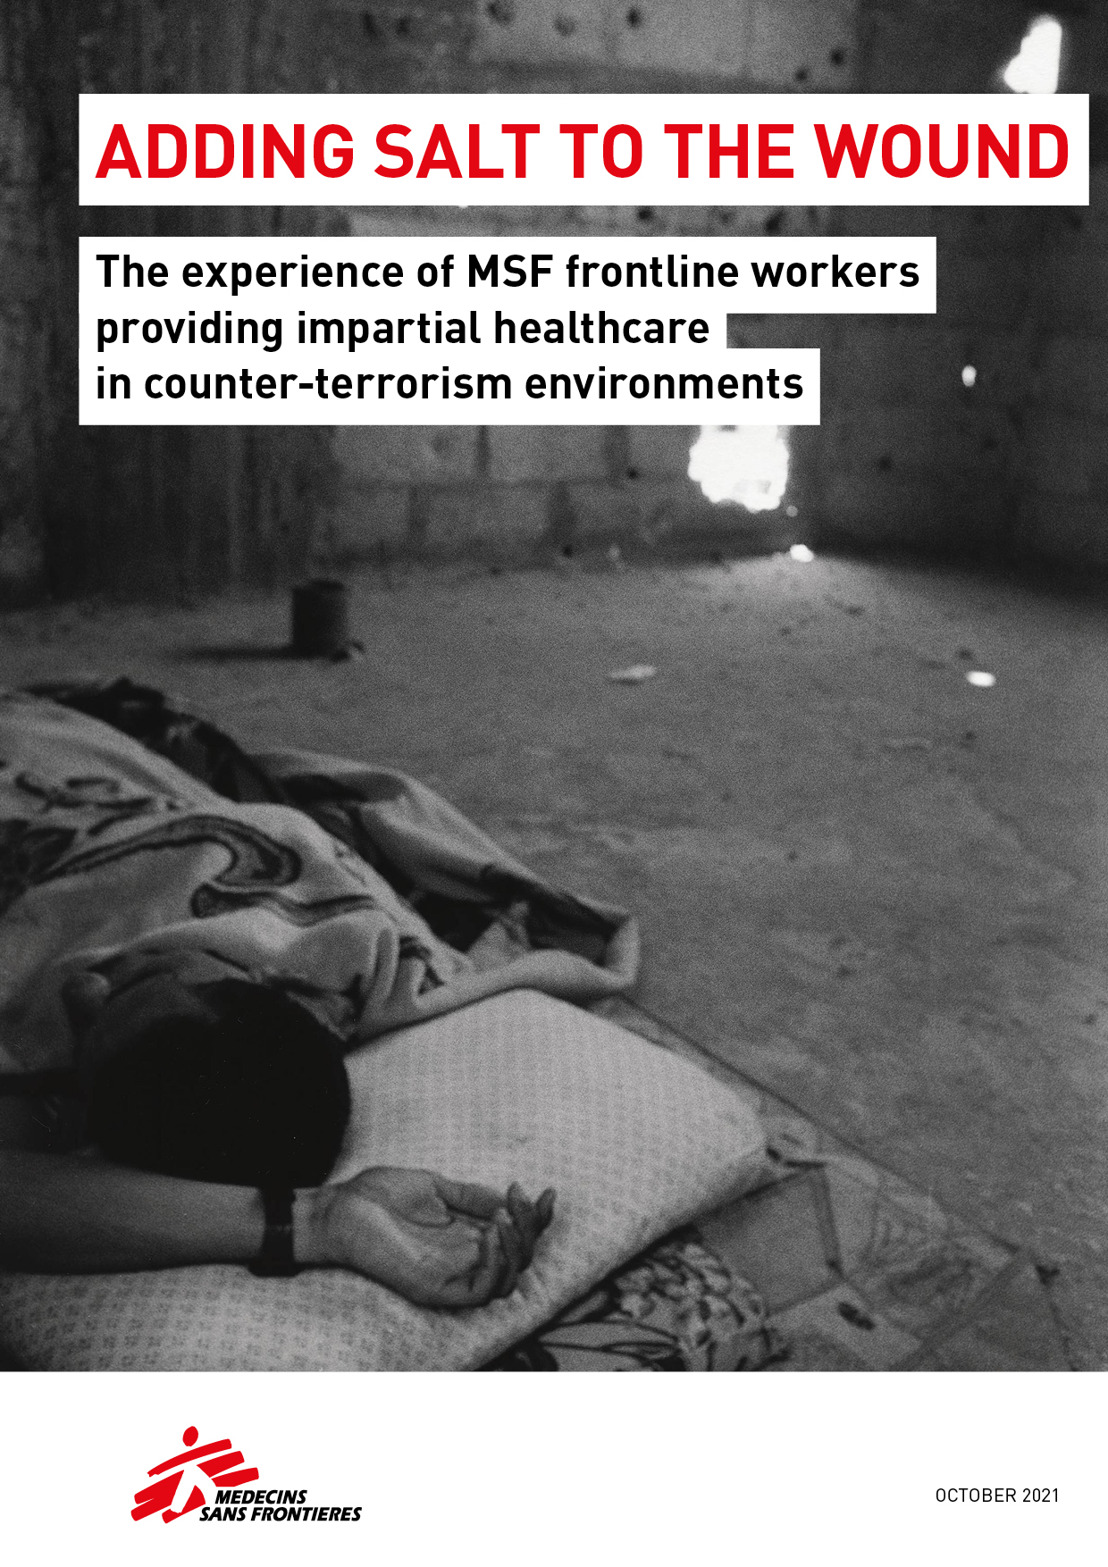 MSF: New report highlighting the consequences of counter-terrorism on frontline workers